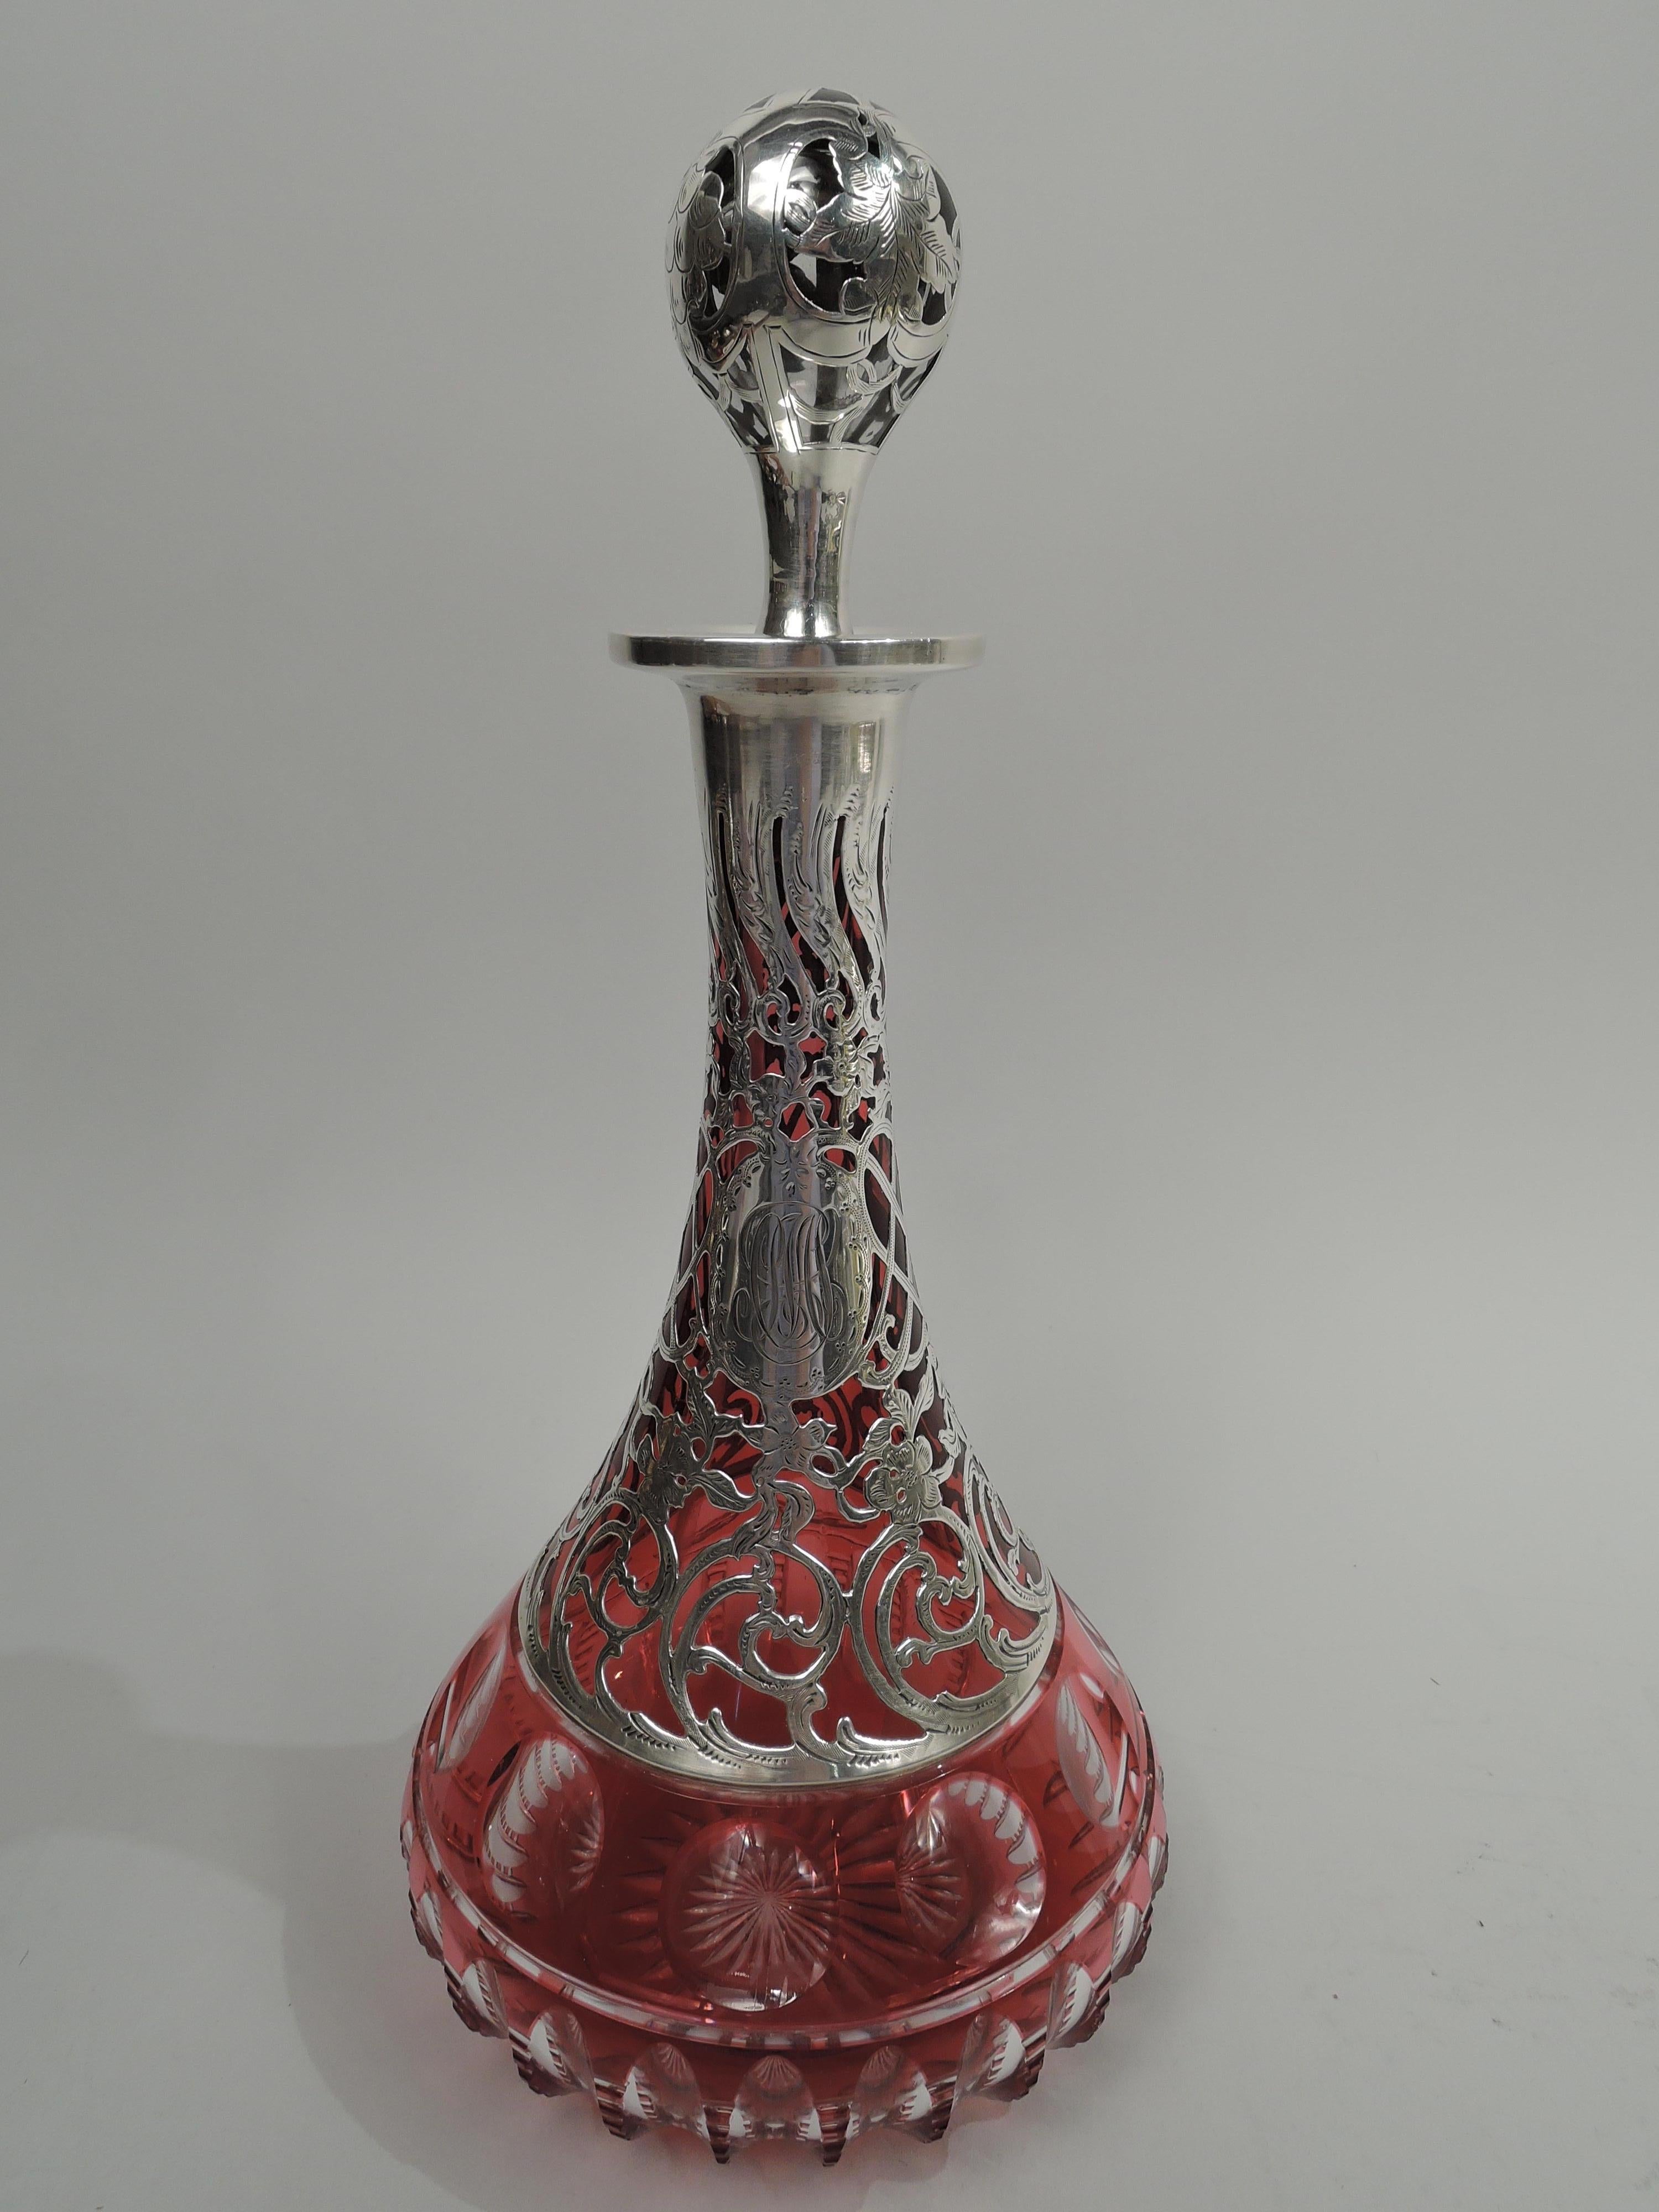 Art Nouveau glass decanter with engraved silver overlay. Made by Alvin Corporation in Providence, circa 1890. Conical with cut-to-clear geometric ornament at base, and star on underside. Dense overlay with rinceaux, flowers, and scrollwork. Ball